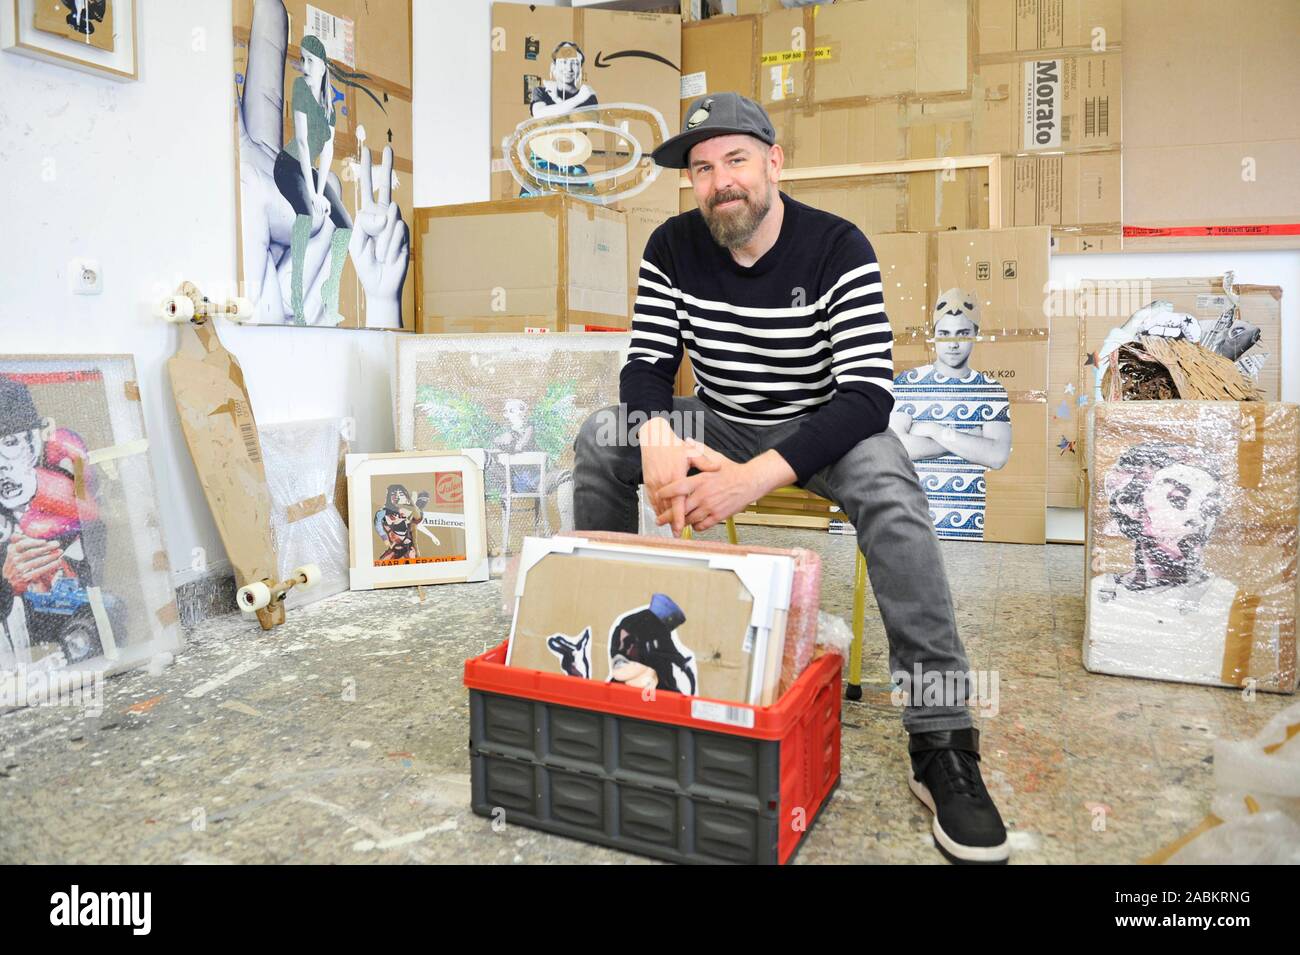 The former music video director Matthias Edlinger has given up his old profession and now makes art with cardboard boxes in his studio at Munich's Ostbahnhof. [automated translation] Stock Photo